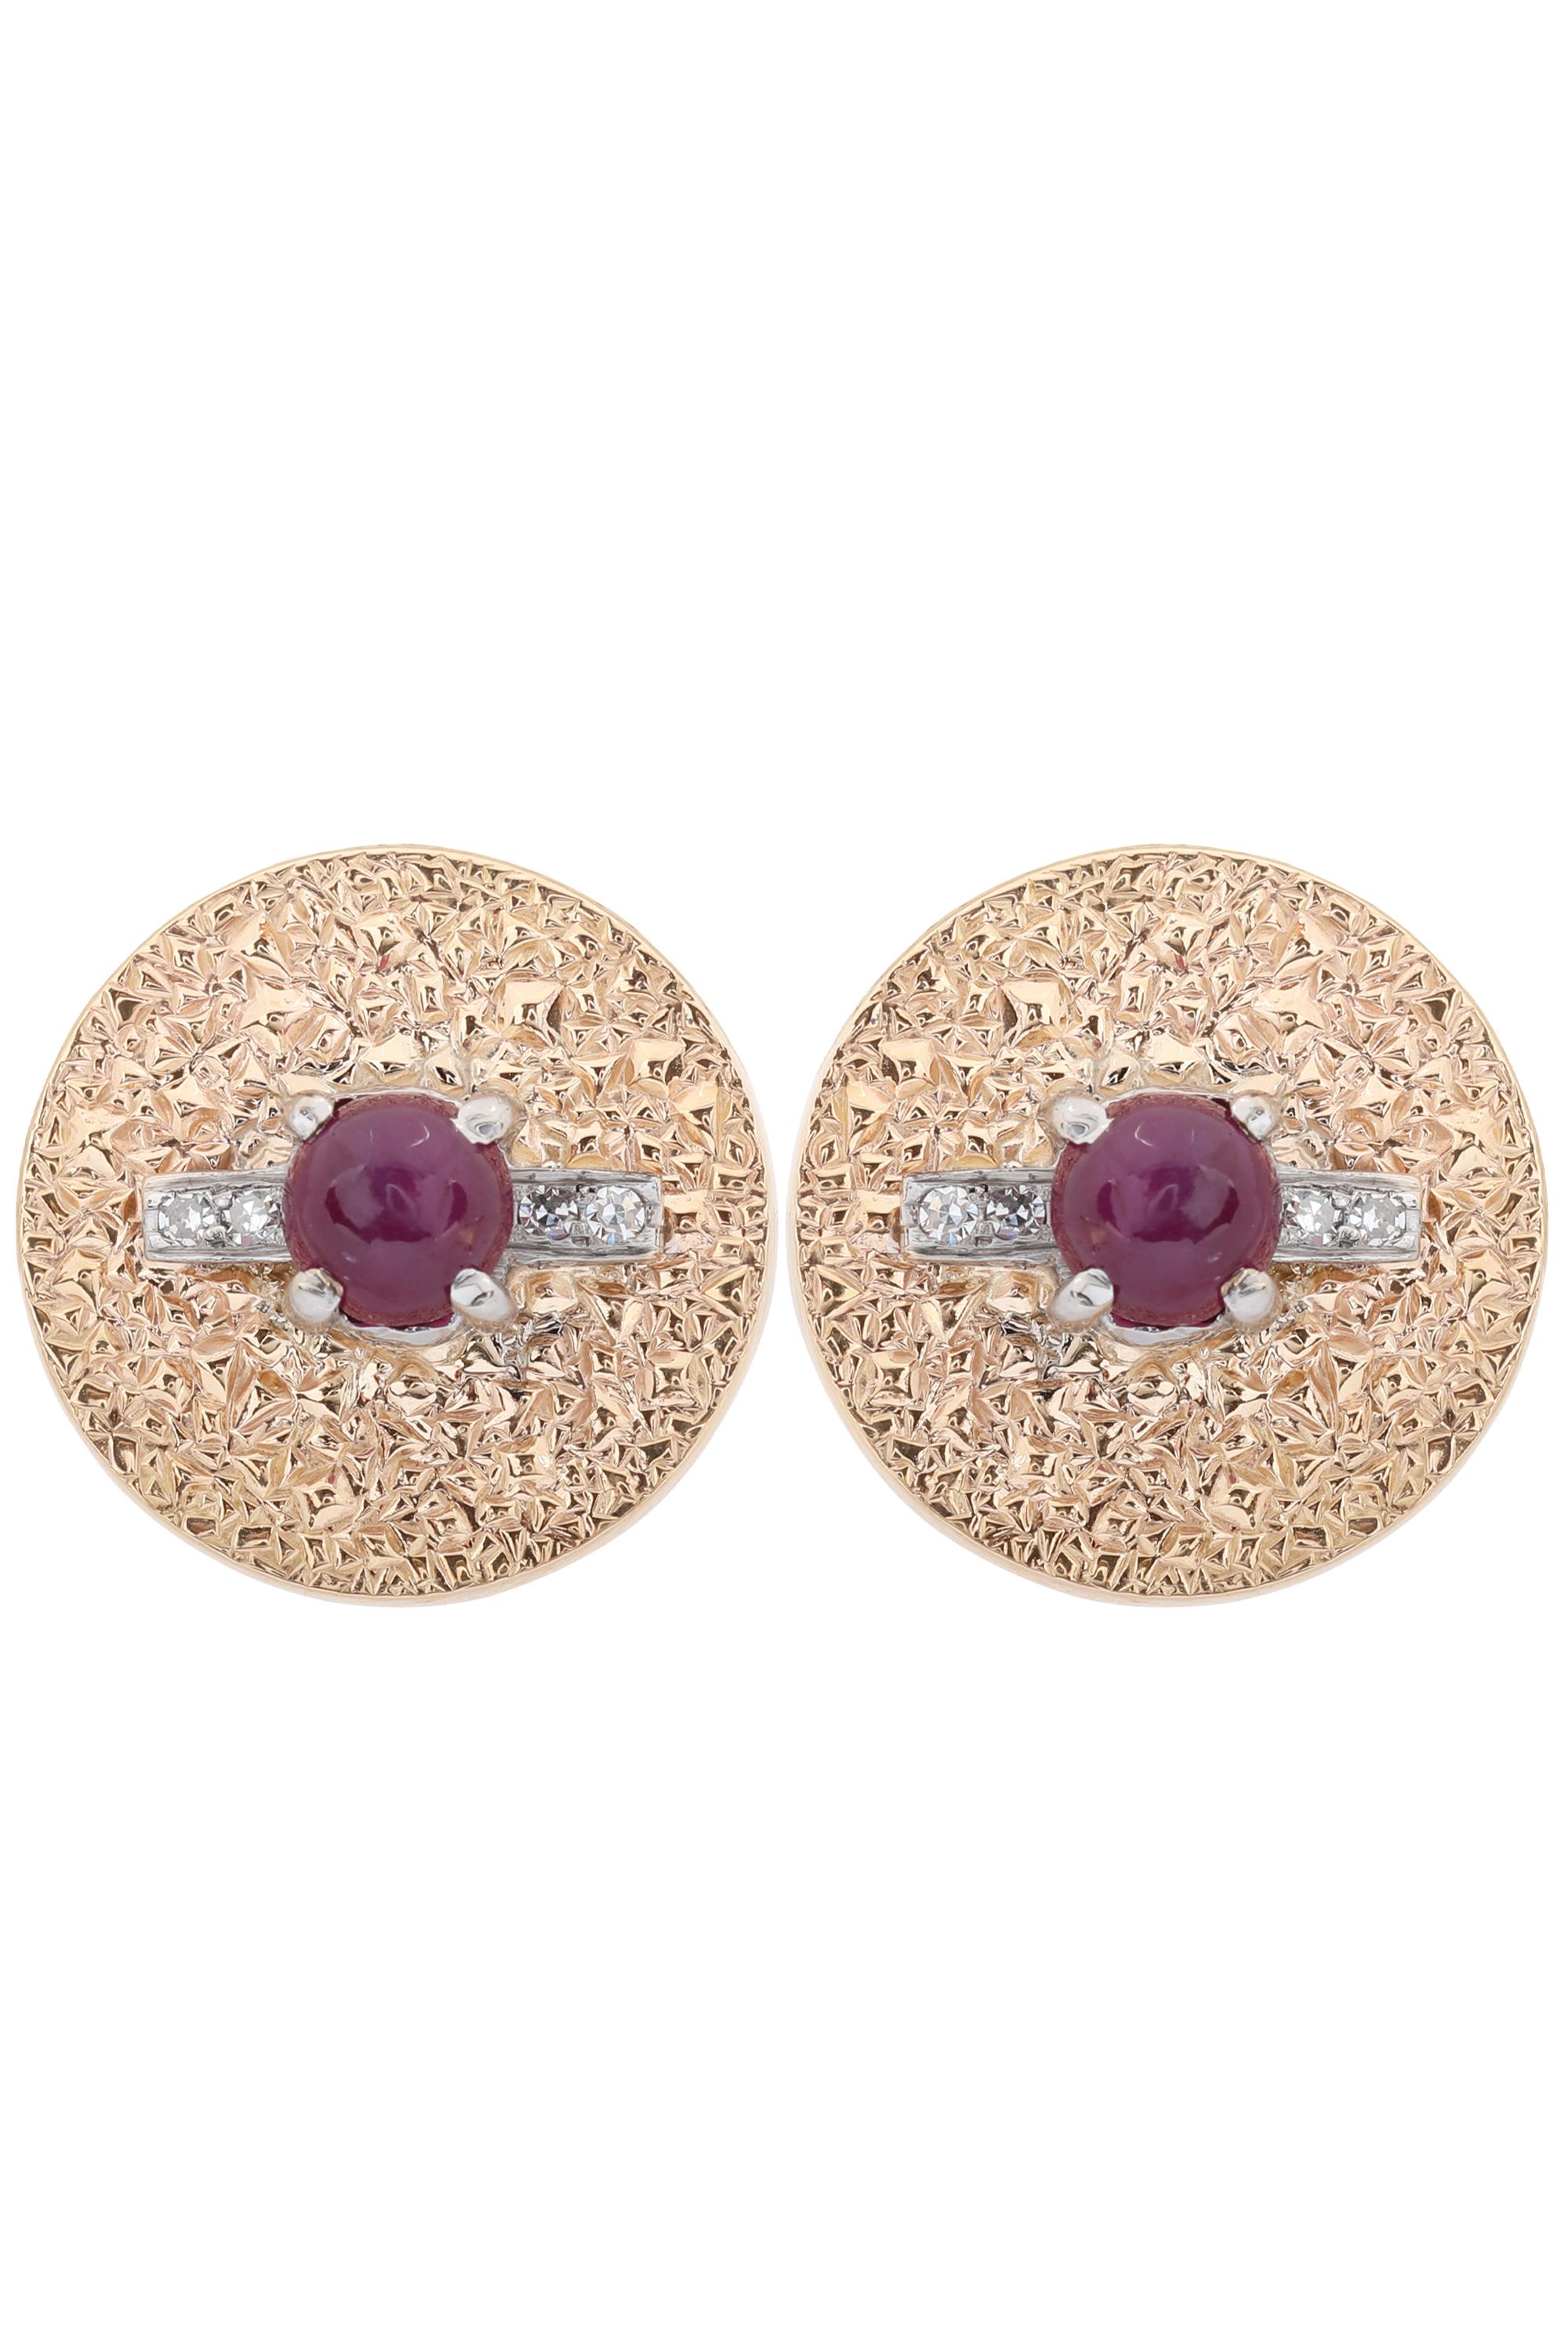 Vintage circle disc earrings with cabochon ruby at center and small diamond accents. The ruby measures 5.8 x 5.8 mm and weighs approximately 1.25 carat each. Beautiful textured surface adds dimension to the piece. The earrings were crafted with 14k